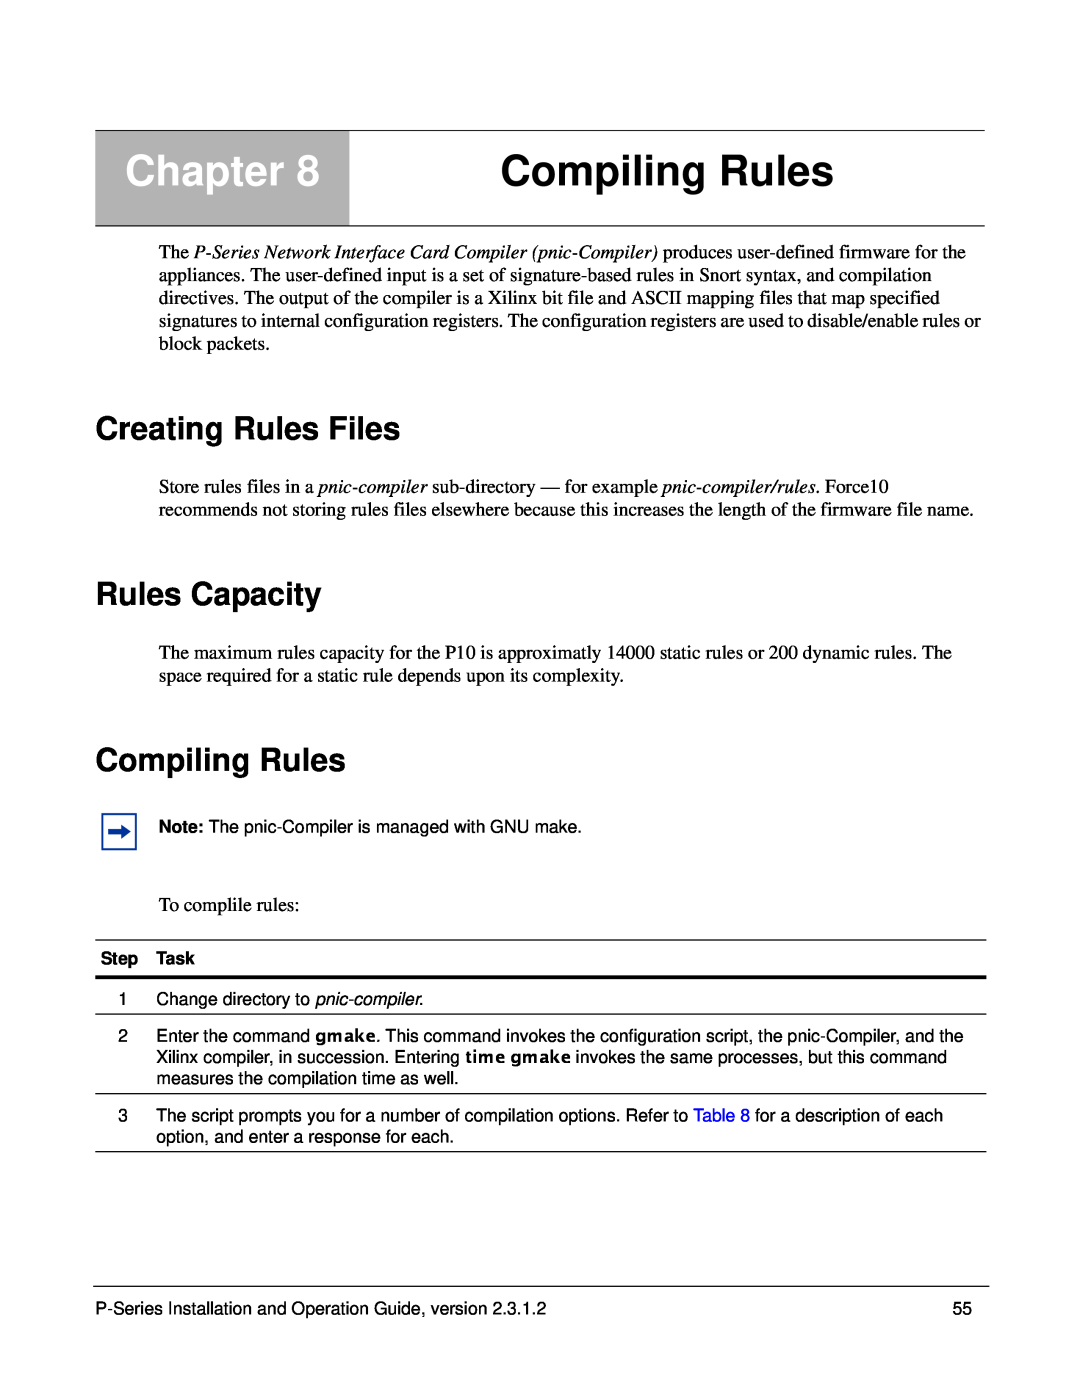 Force10 Networks 100-00055-01 manual Compiling Rules, Creating Rules Files, Rules Capacity, Chapter 